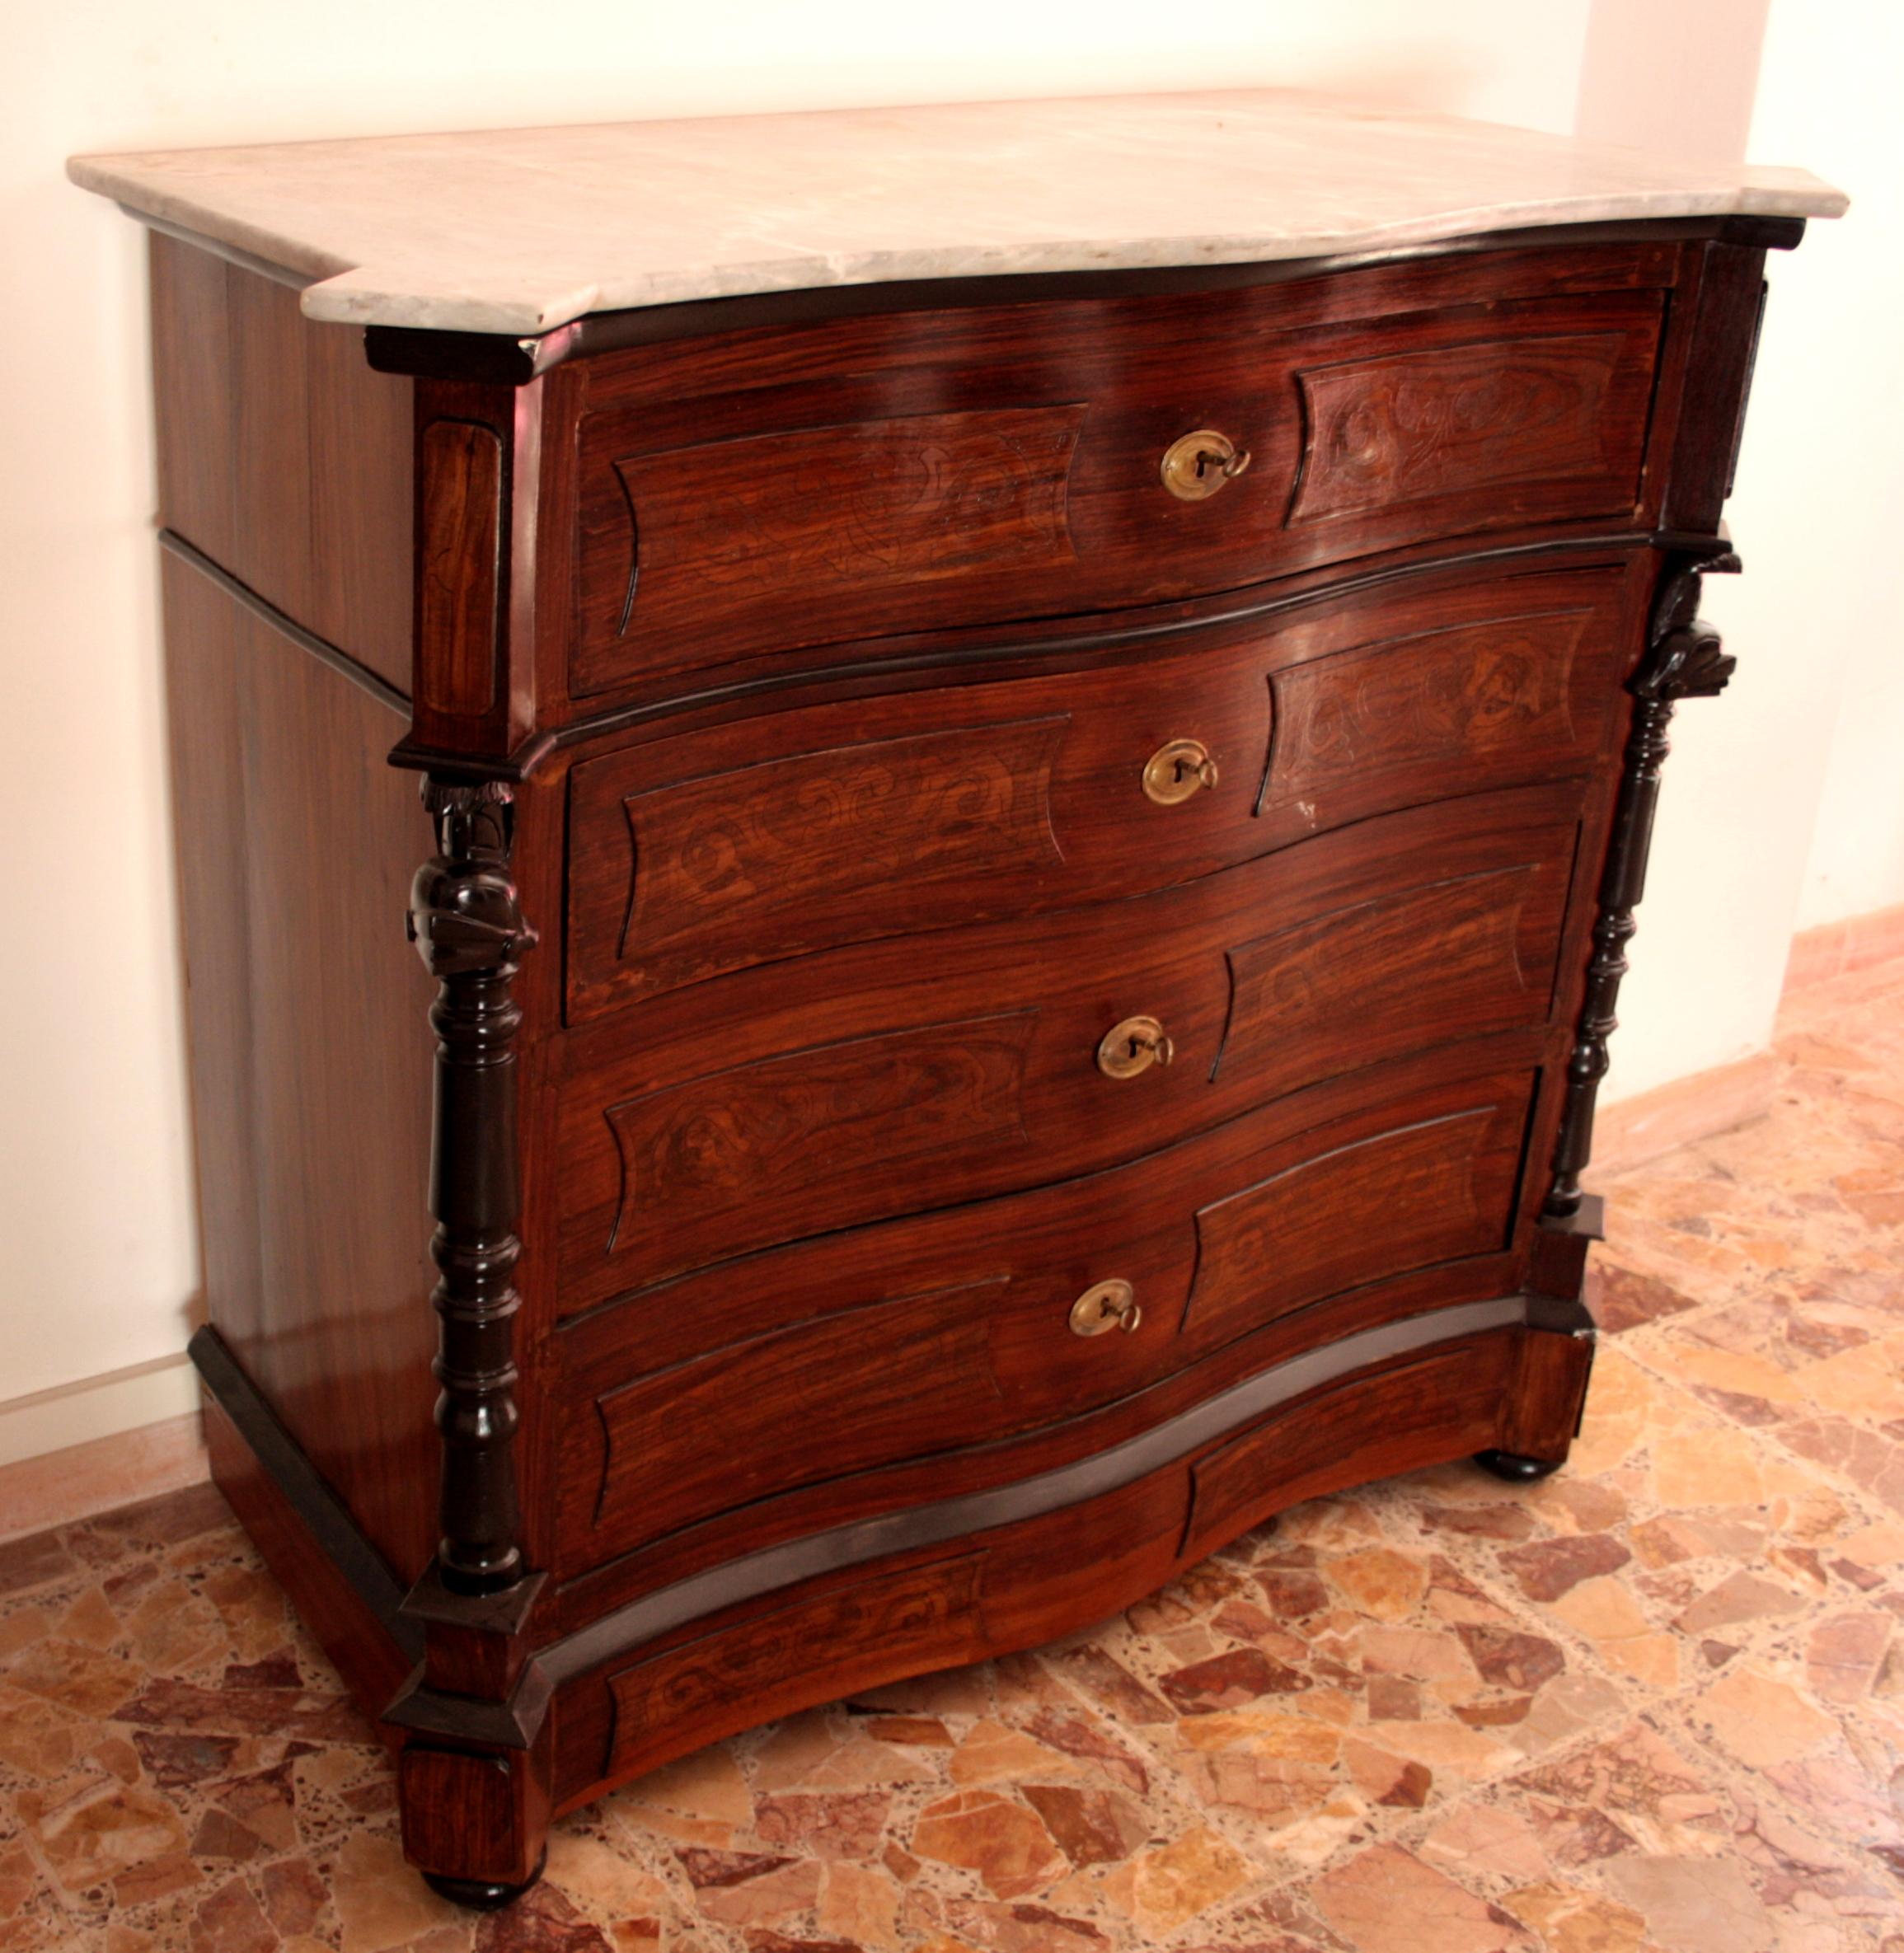 Subject: Chest of drawers

Period: 1870/1880

Style: Late Louis Philippe

Origin: Naples, southern Italy

Description:

Chest of drawers with 4 drawers, made in the Neapolitan area in 1870/1880. First of all, skilful craftsmanship, excellent choice